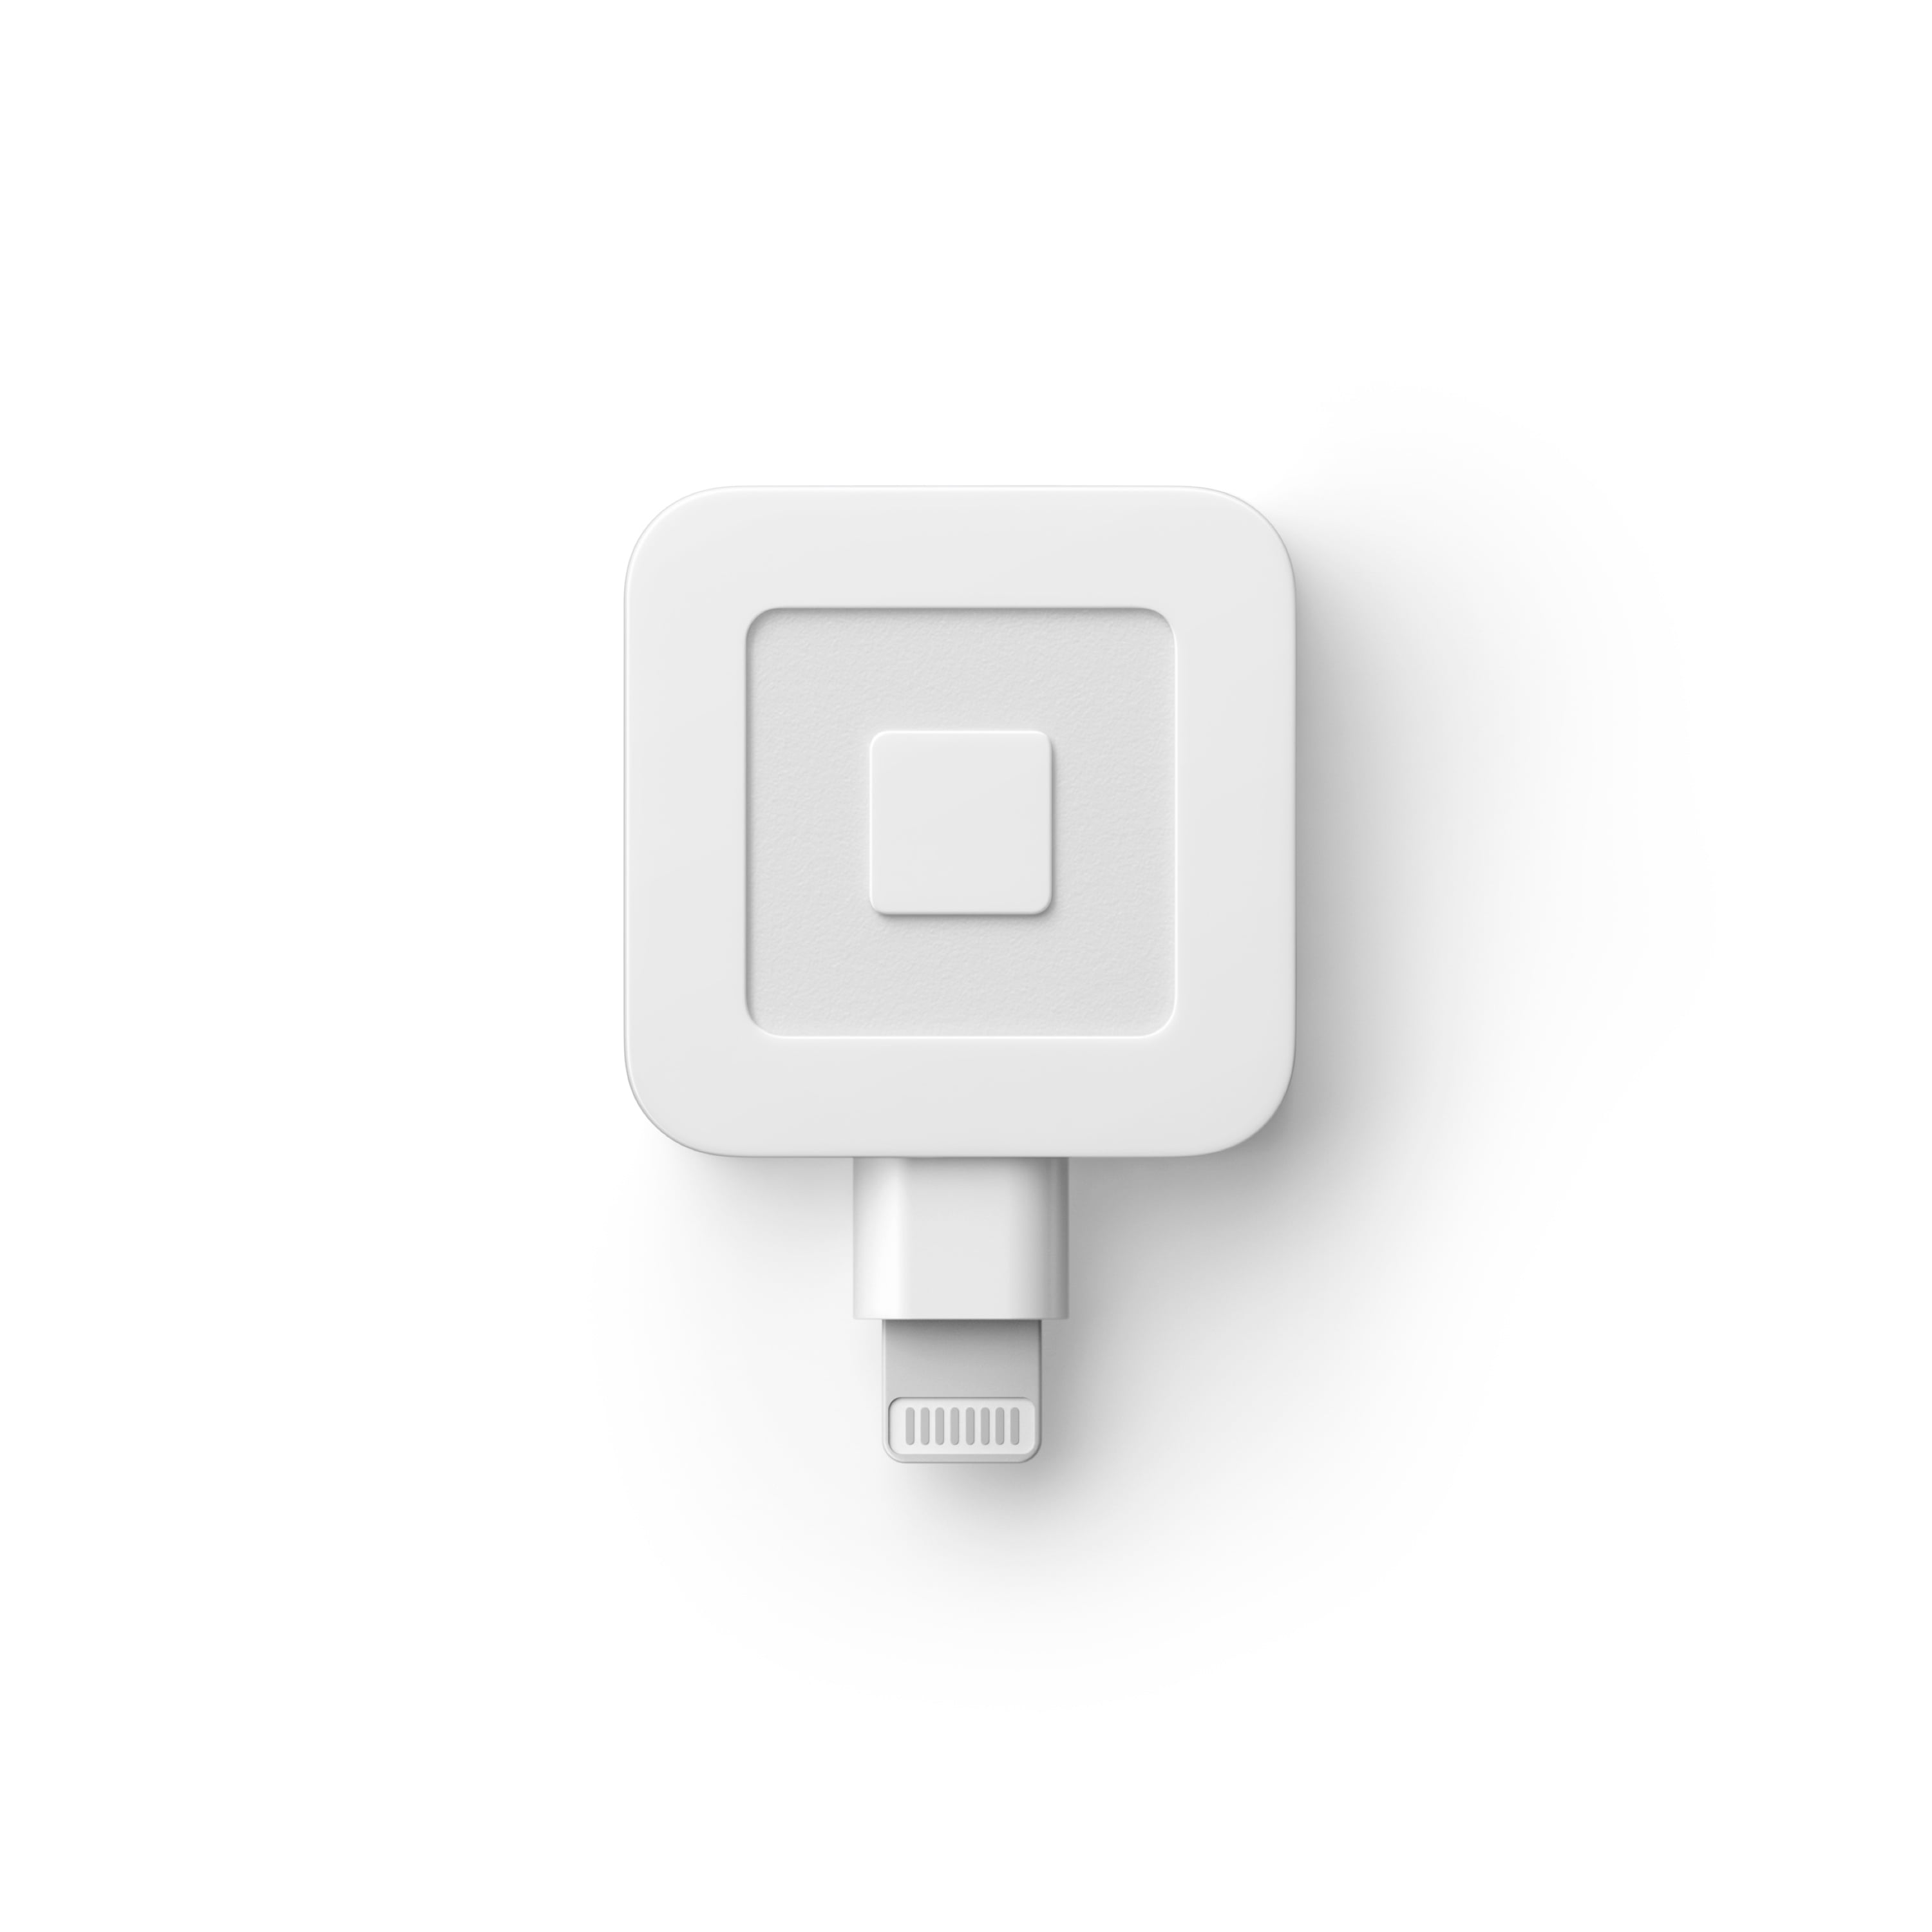 Square Credit Card Reader for Iphones and Androids & iPads NWOB